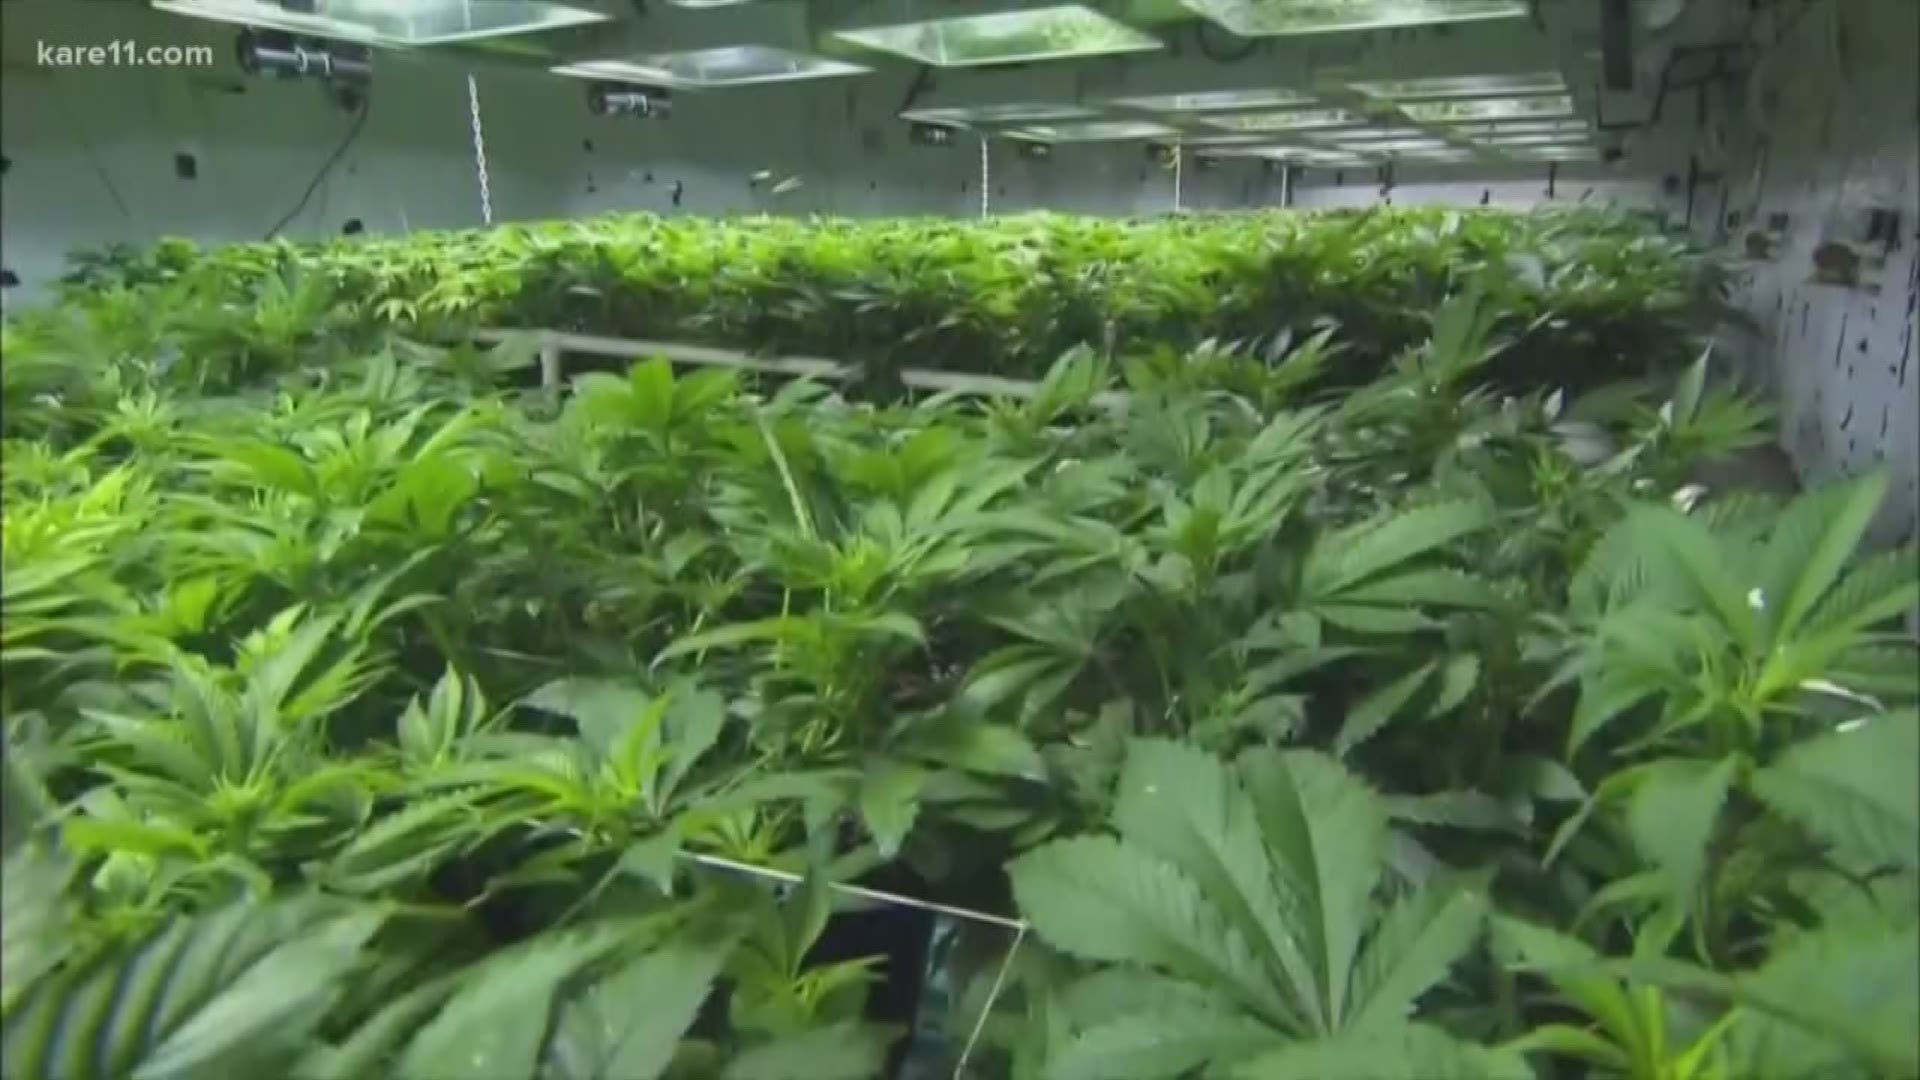 The first bill to focus on recreational marijuana is on the table at the State Capitol. The talks could send this question to the voters, as early as 2020. https://kare11.tv/2FQCpyo